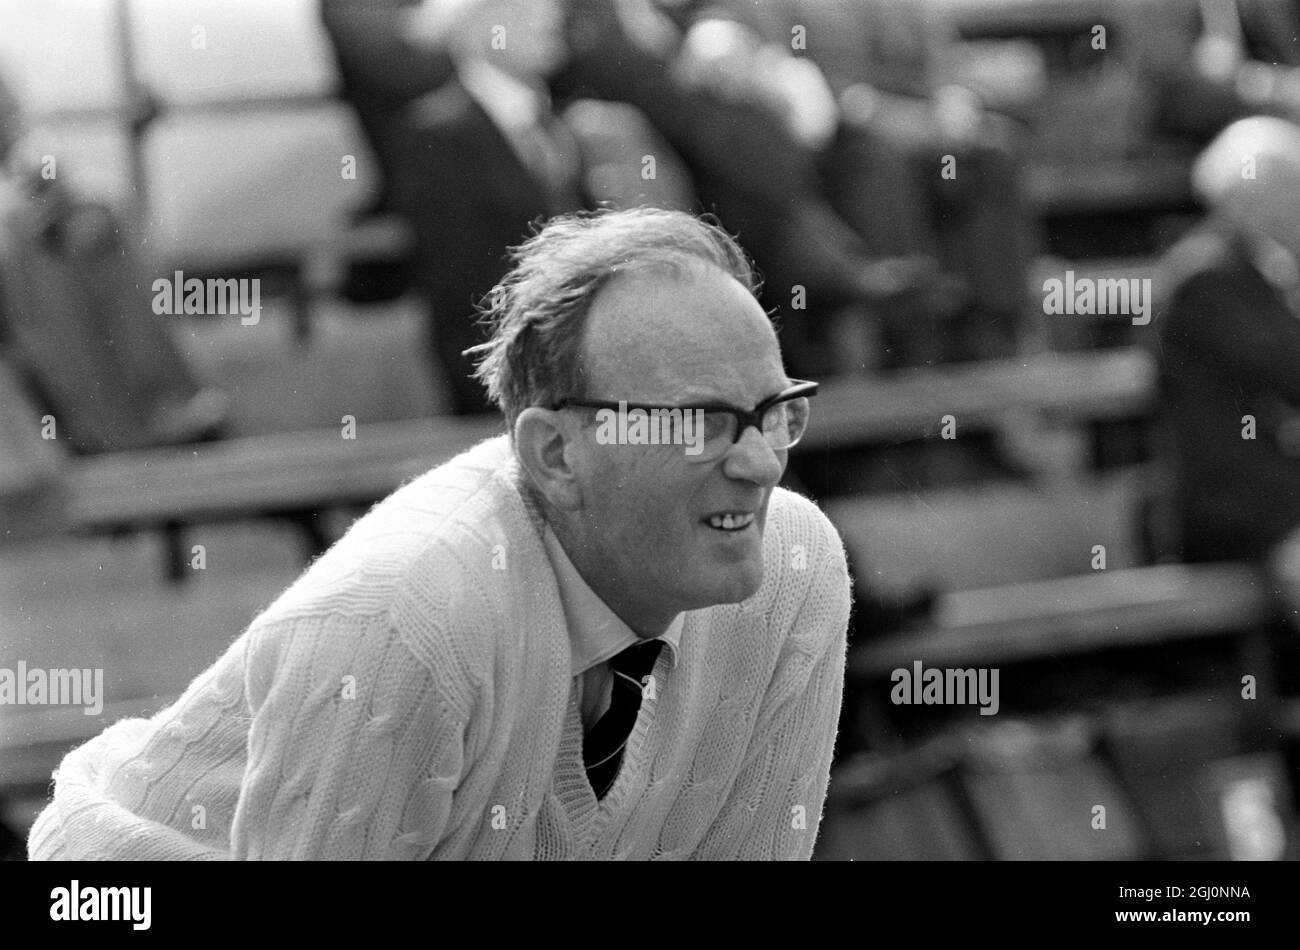 Walter Coulson , a member of the Leicester B team , during a tense moment in the match . Walter is pictured while playing in the annual National Bowling Championships , Mortlake , London , England . 17 August 1967 Stock Photo